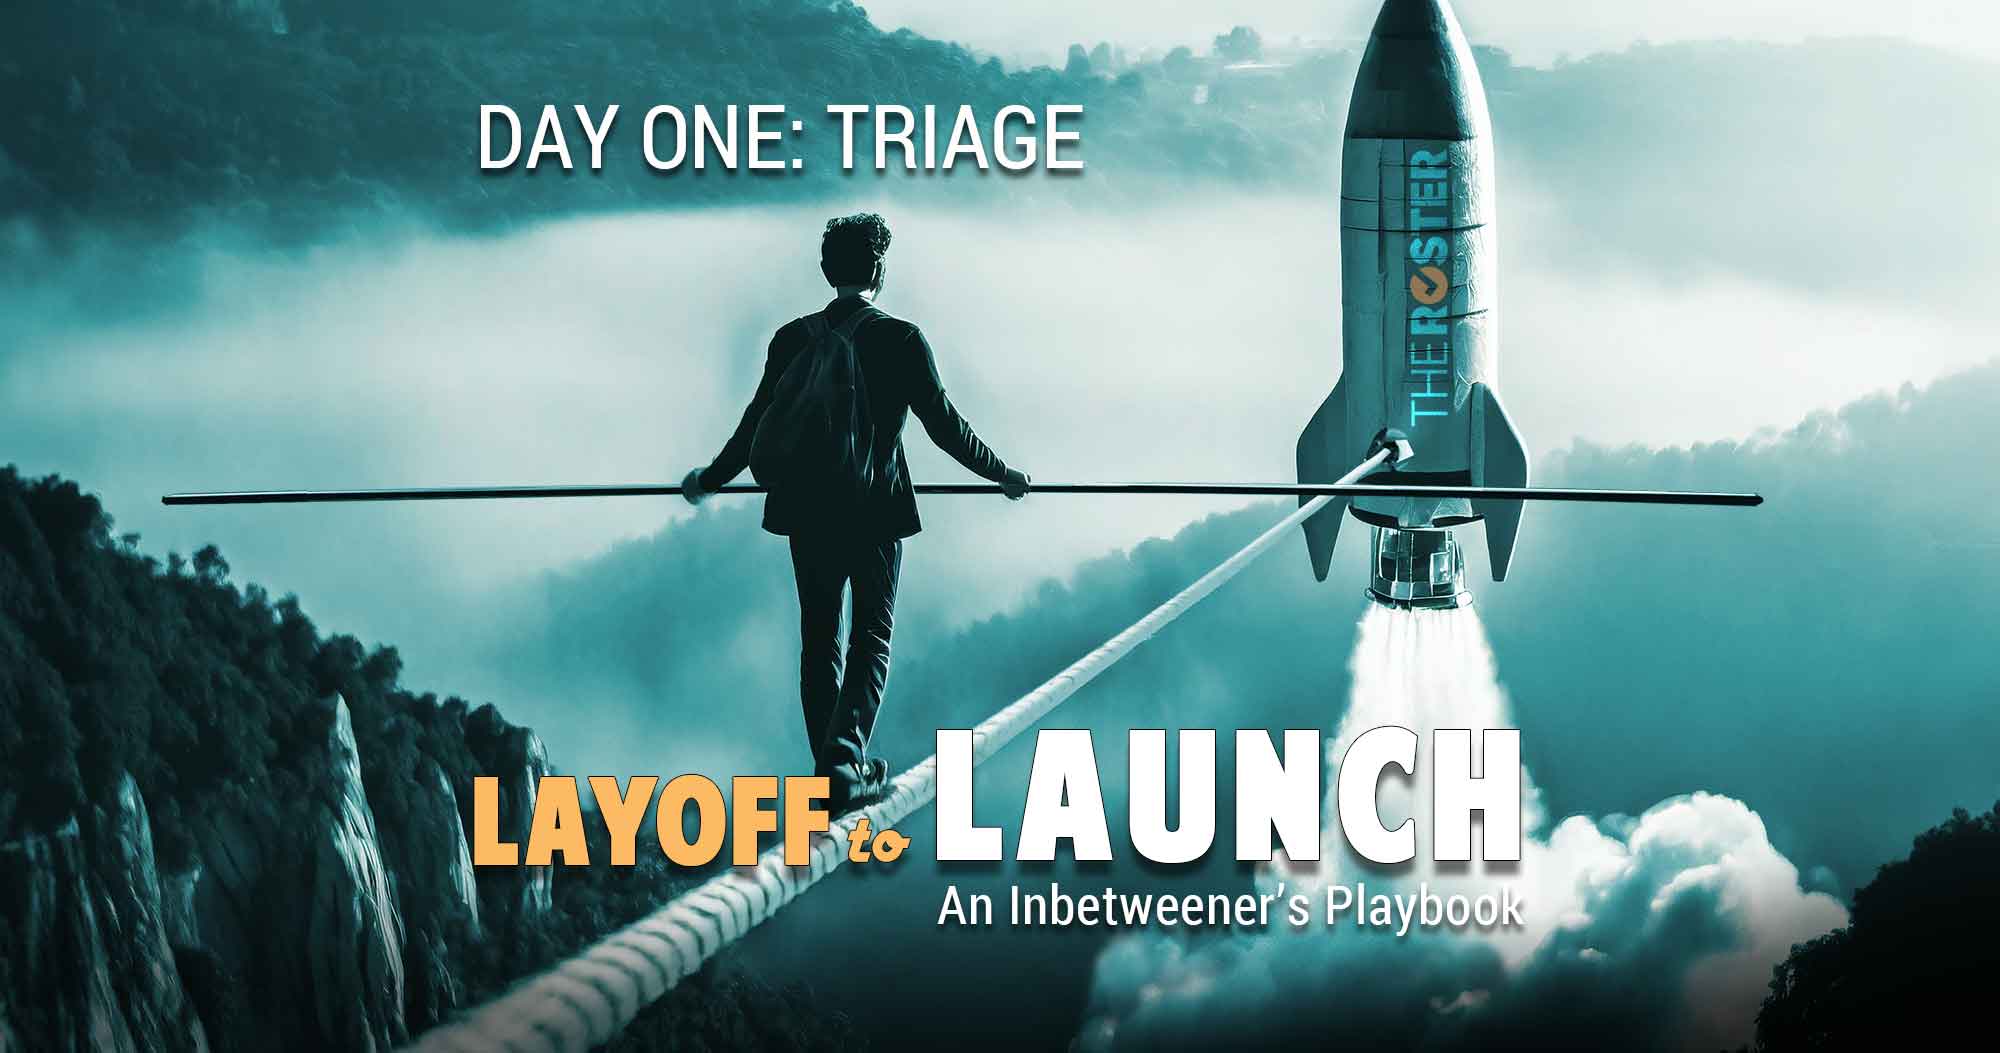 The Roster blog image Day One - Triage. A tightrope walker on a rope leading to a launching rocket.